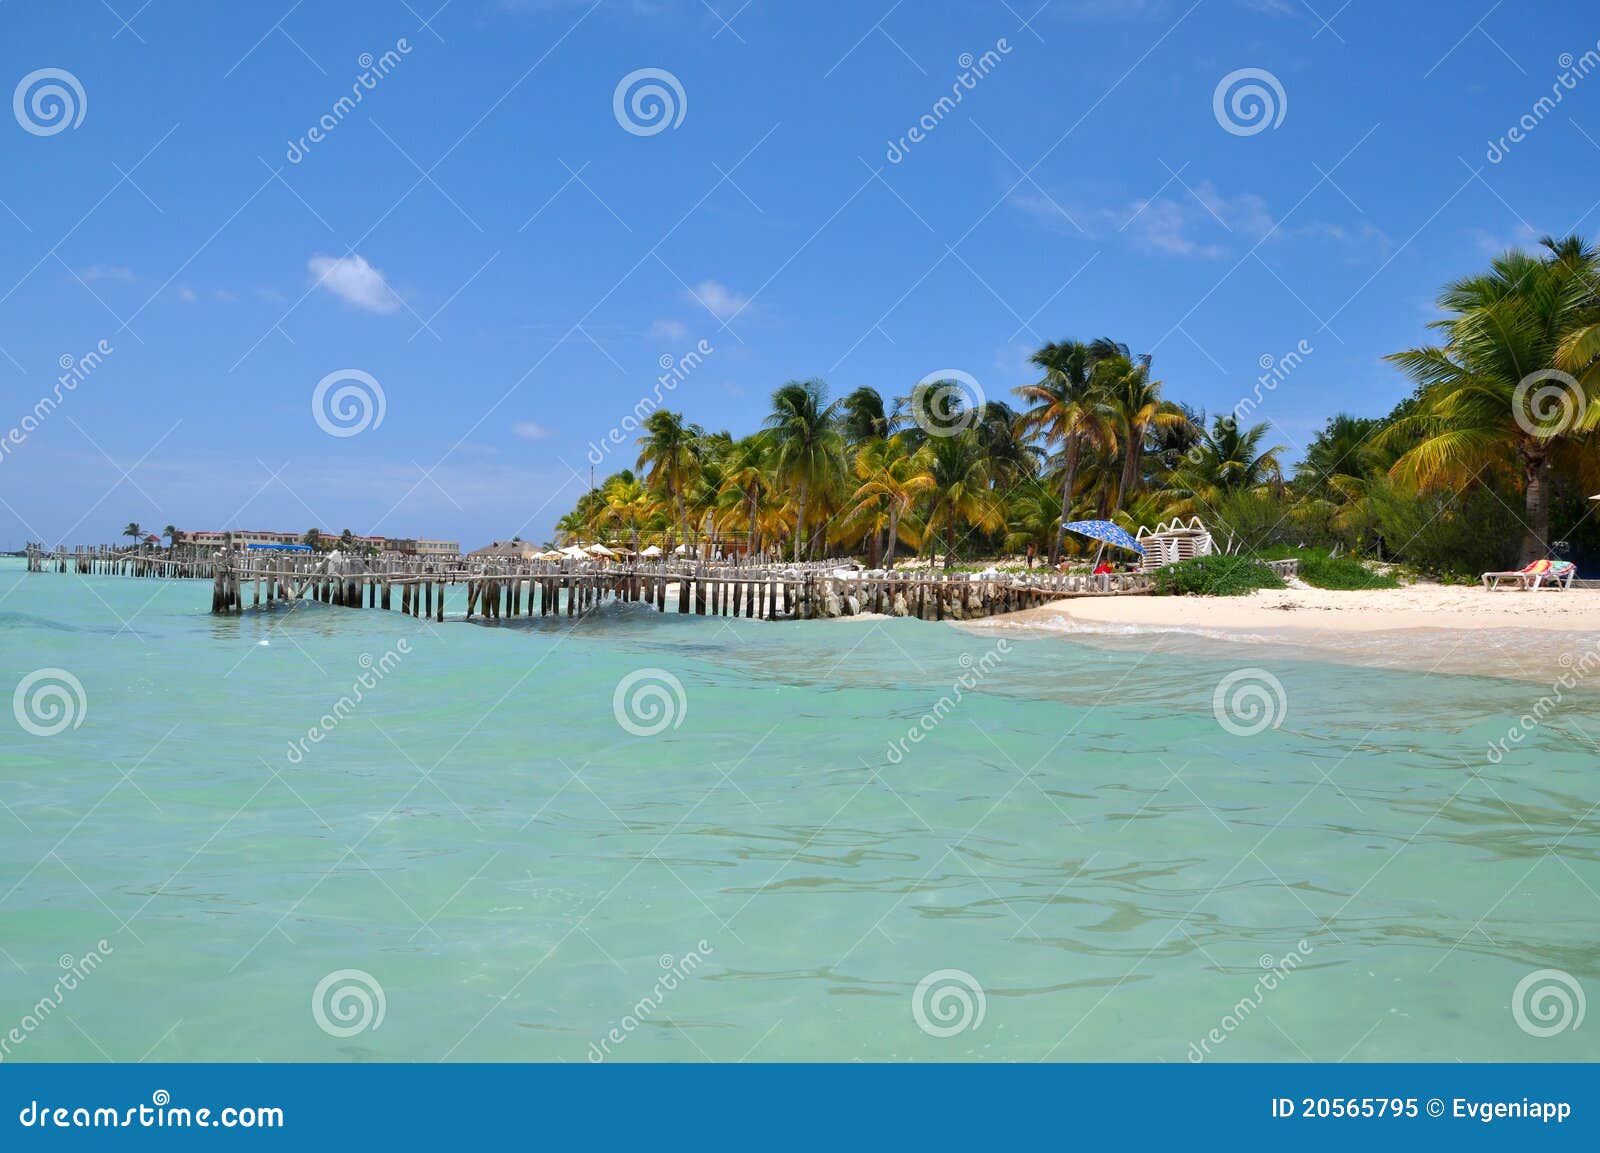 perfect tropical beach in isla mujeres